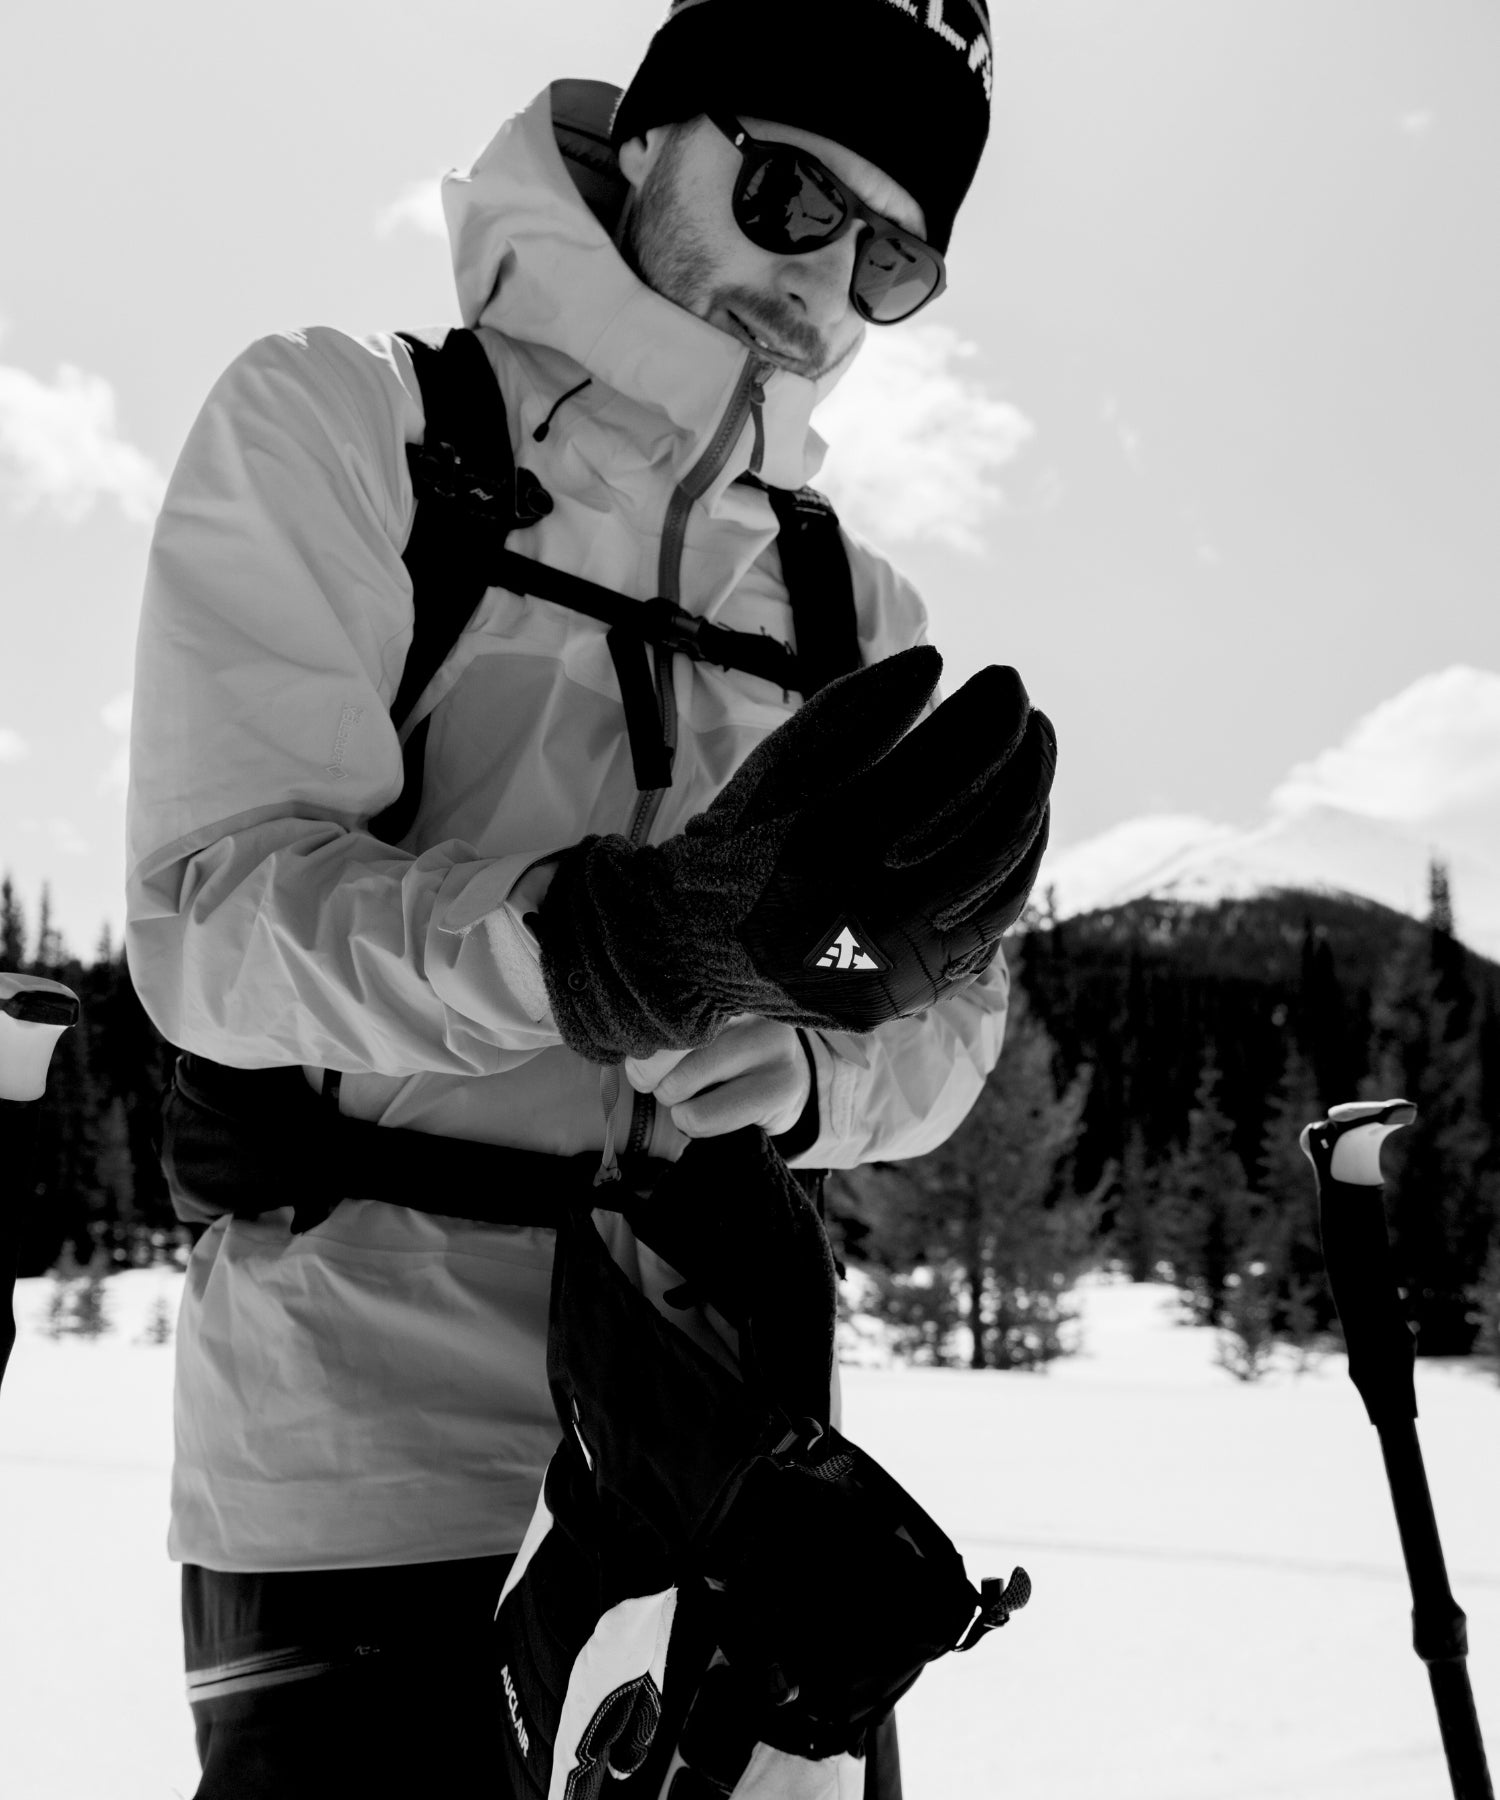 Man adjusting Auclair winter gloves on a snowy mountain, showcasing the Auclair men's collection.